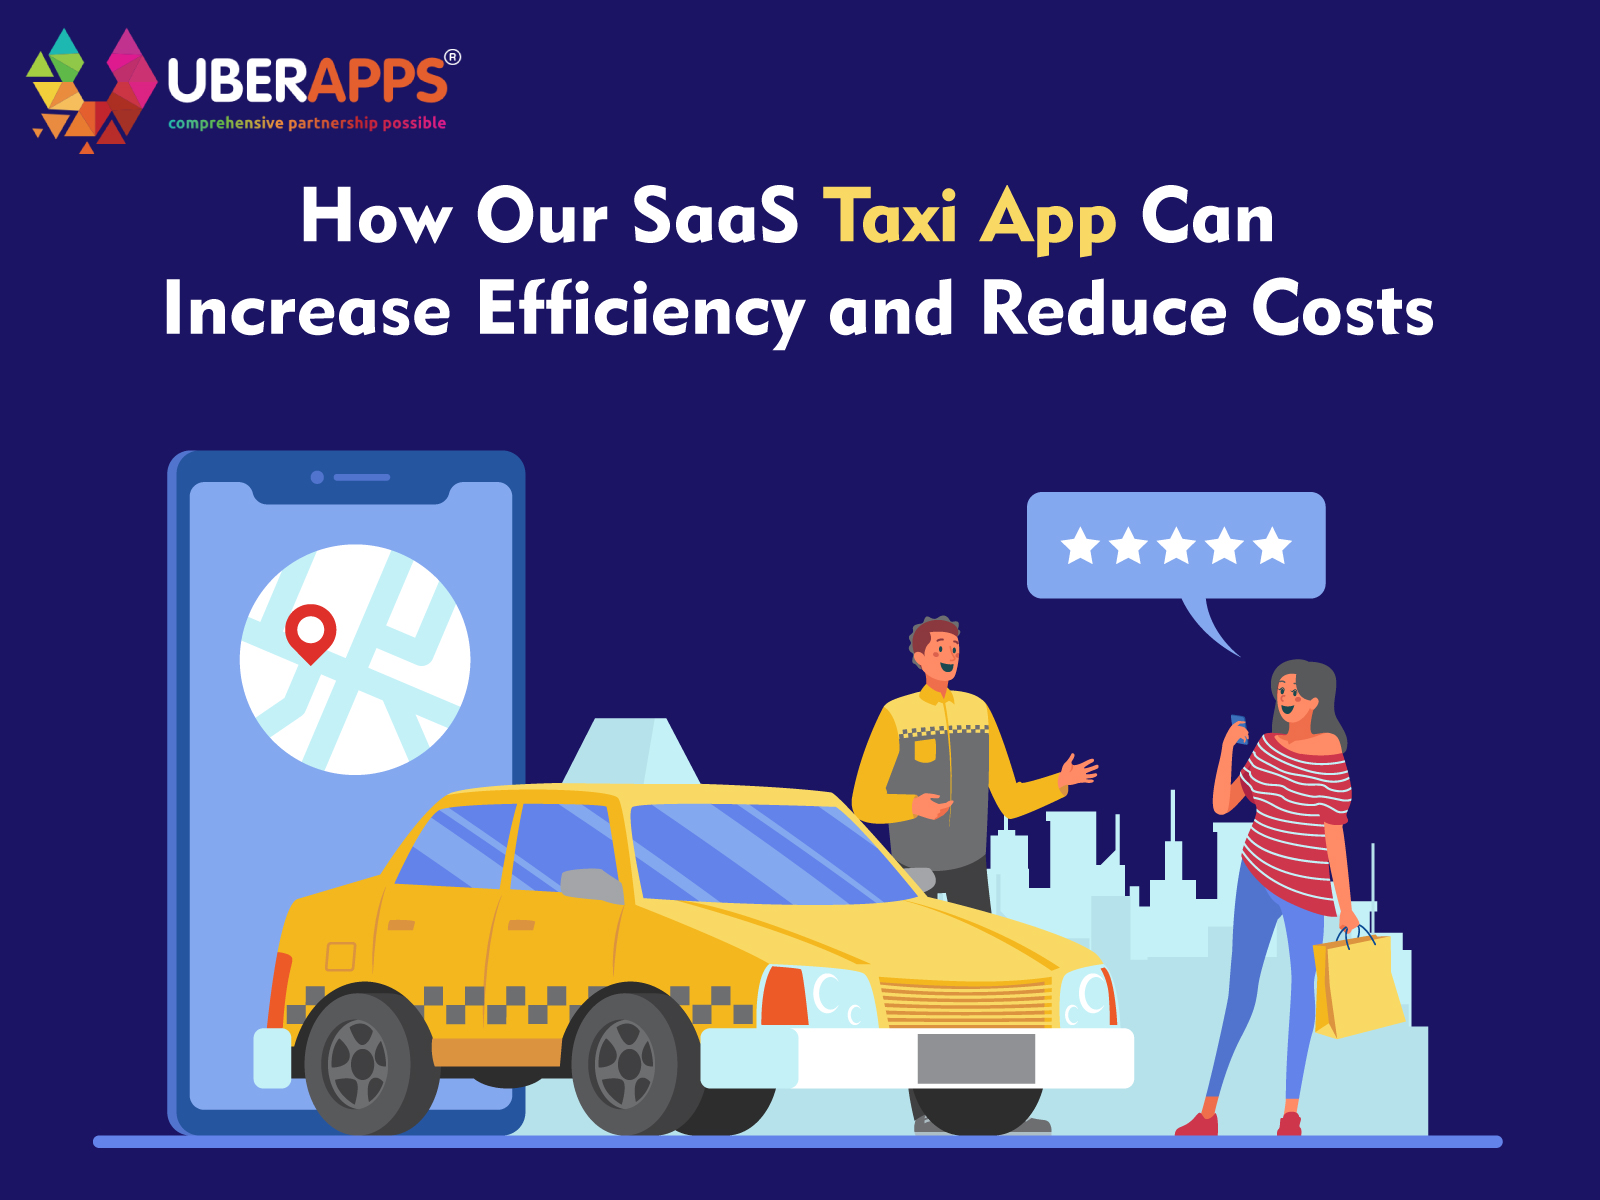 How Our SaaS Taxi App Can Increase Efficiency and Reduce Costs